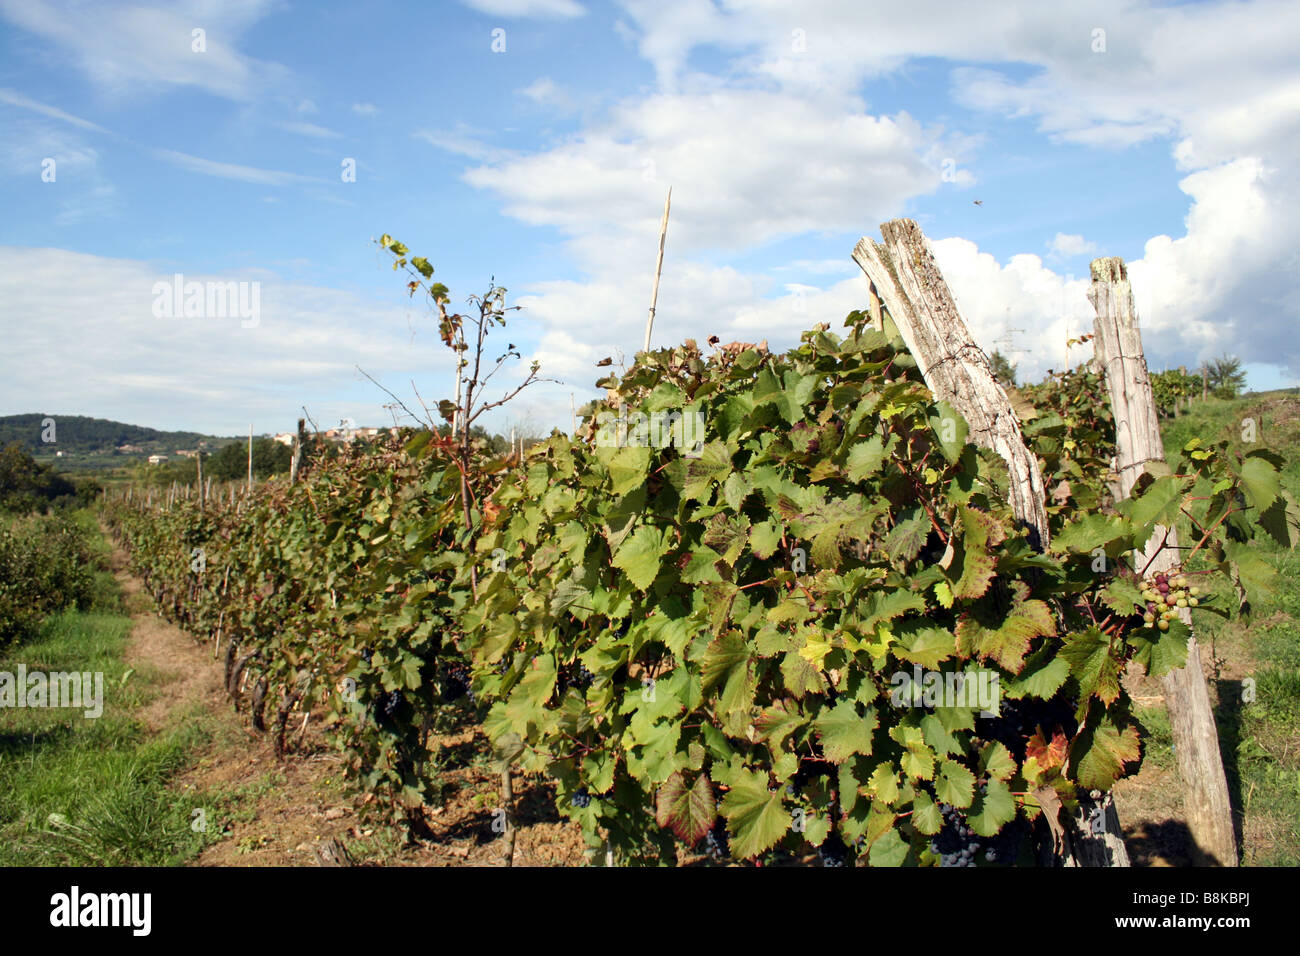 Vineyards and Wine Grapes in Croatia Stock Photo